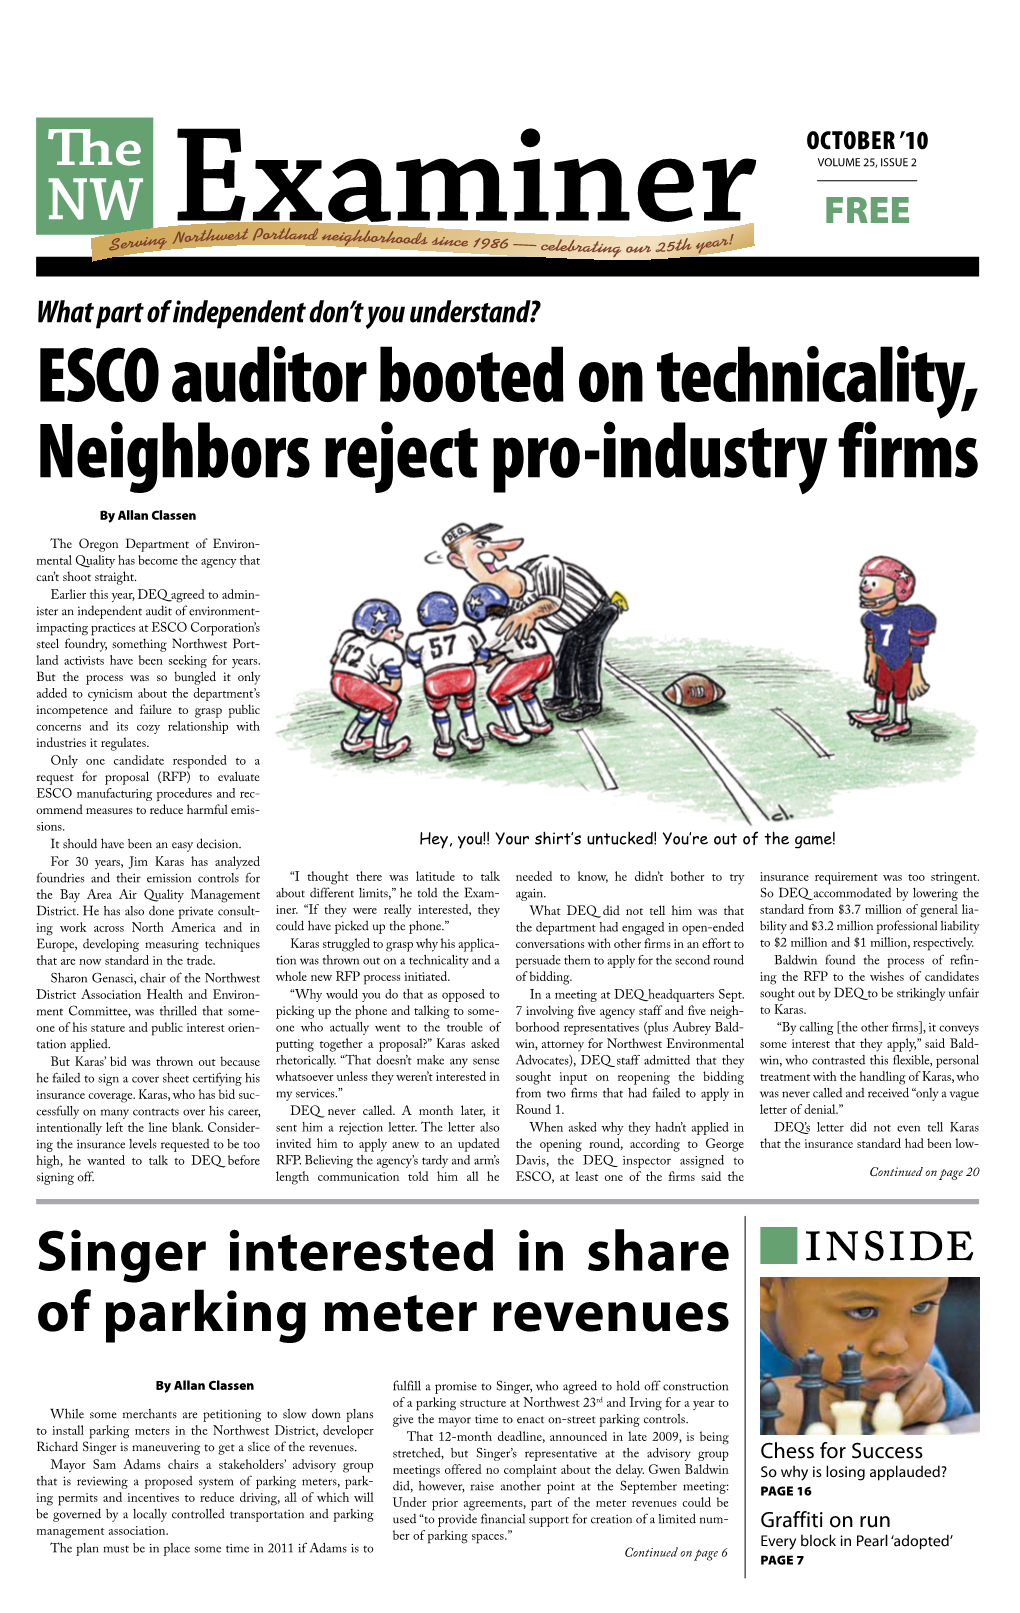 ESCO Auditor Booted on Technicality, Neighbors Reject Pro-Industry Firms by Allan Classen